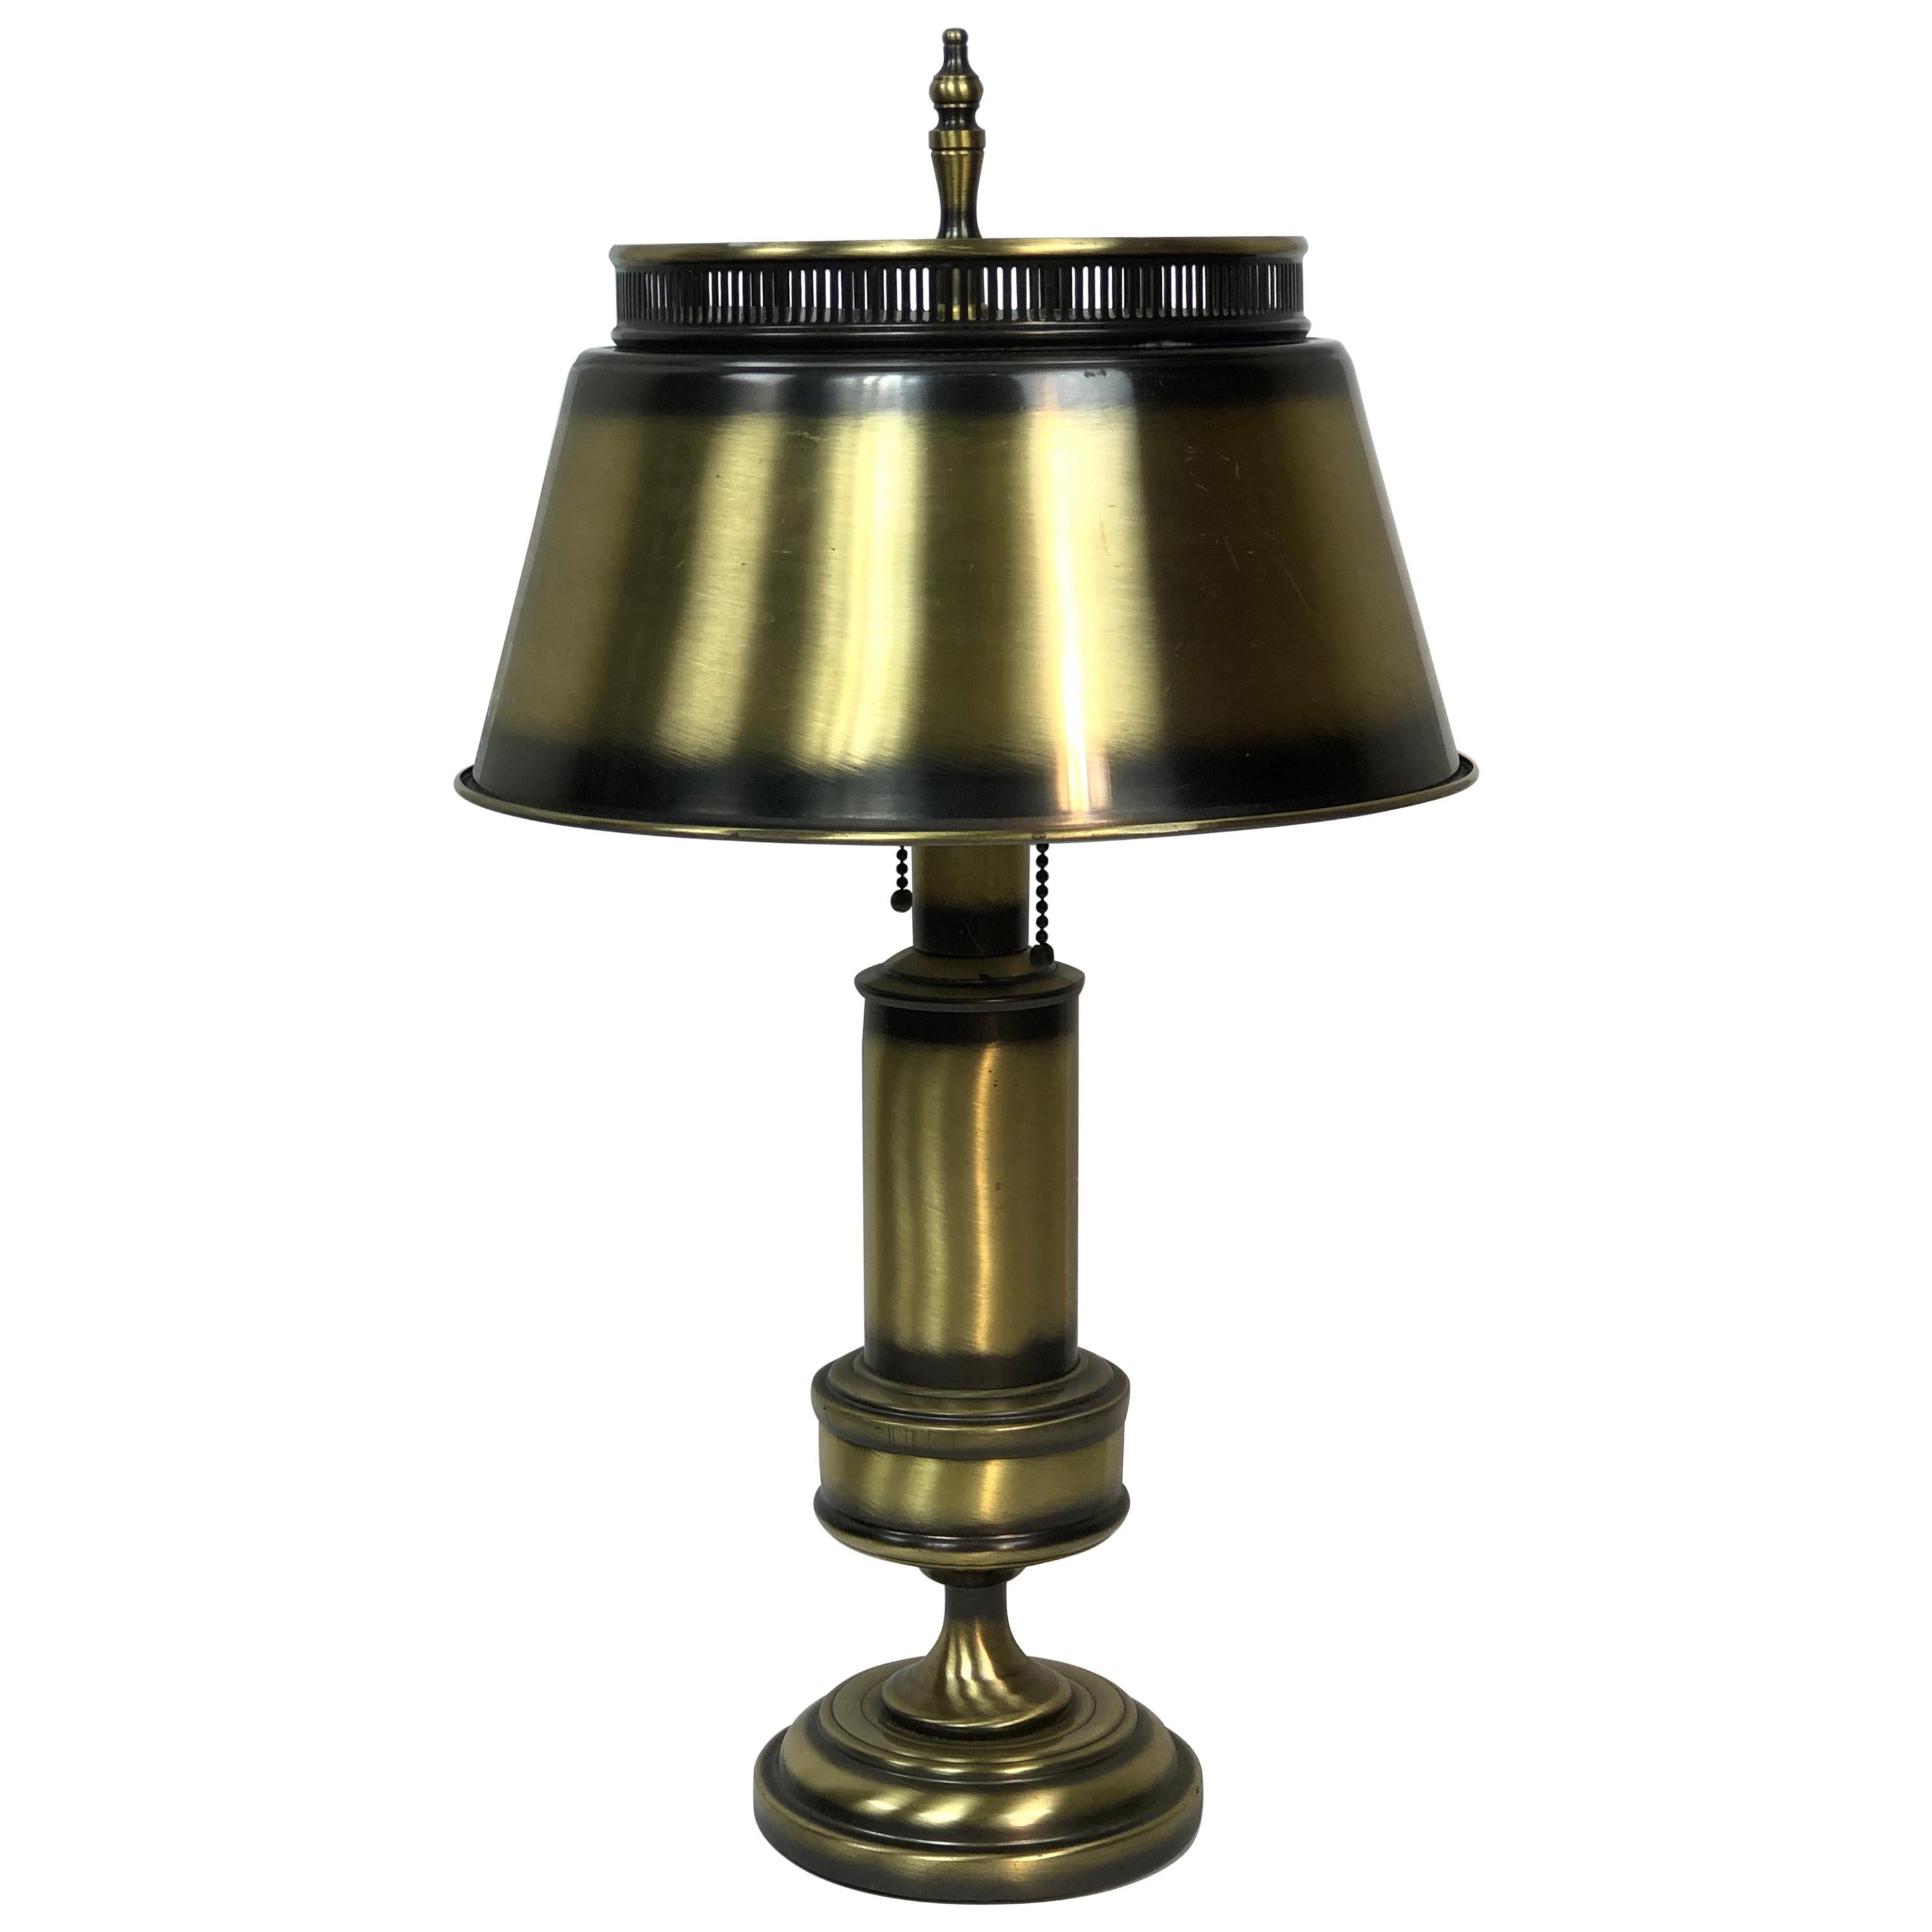 1960s Burnished Brass Table Lamp For Sale